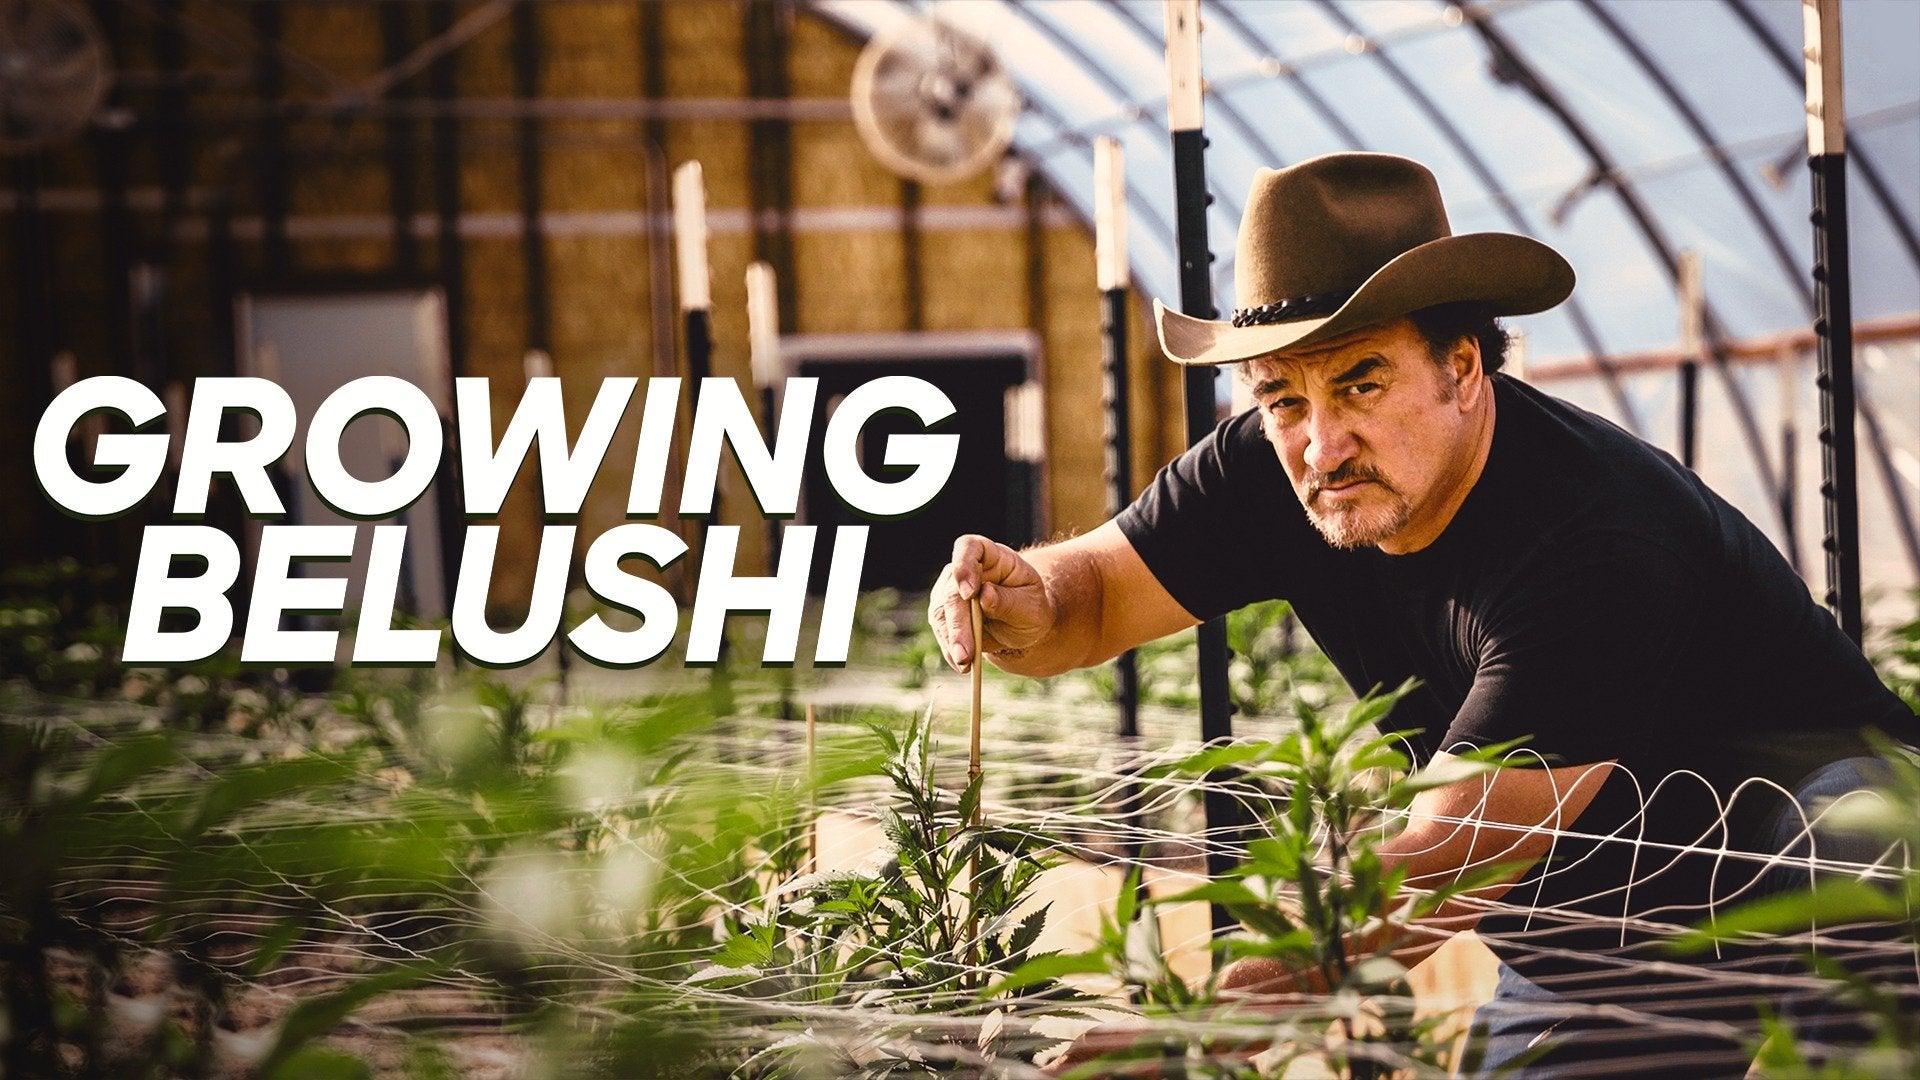 Growing Belushi S02E03 720p  The Pot Thickens